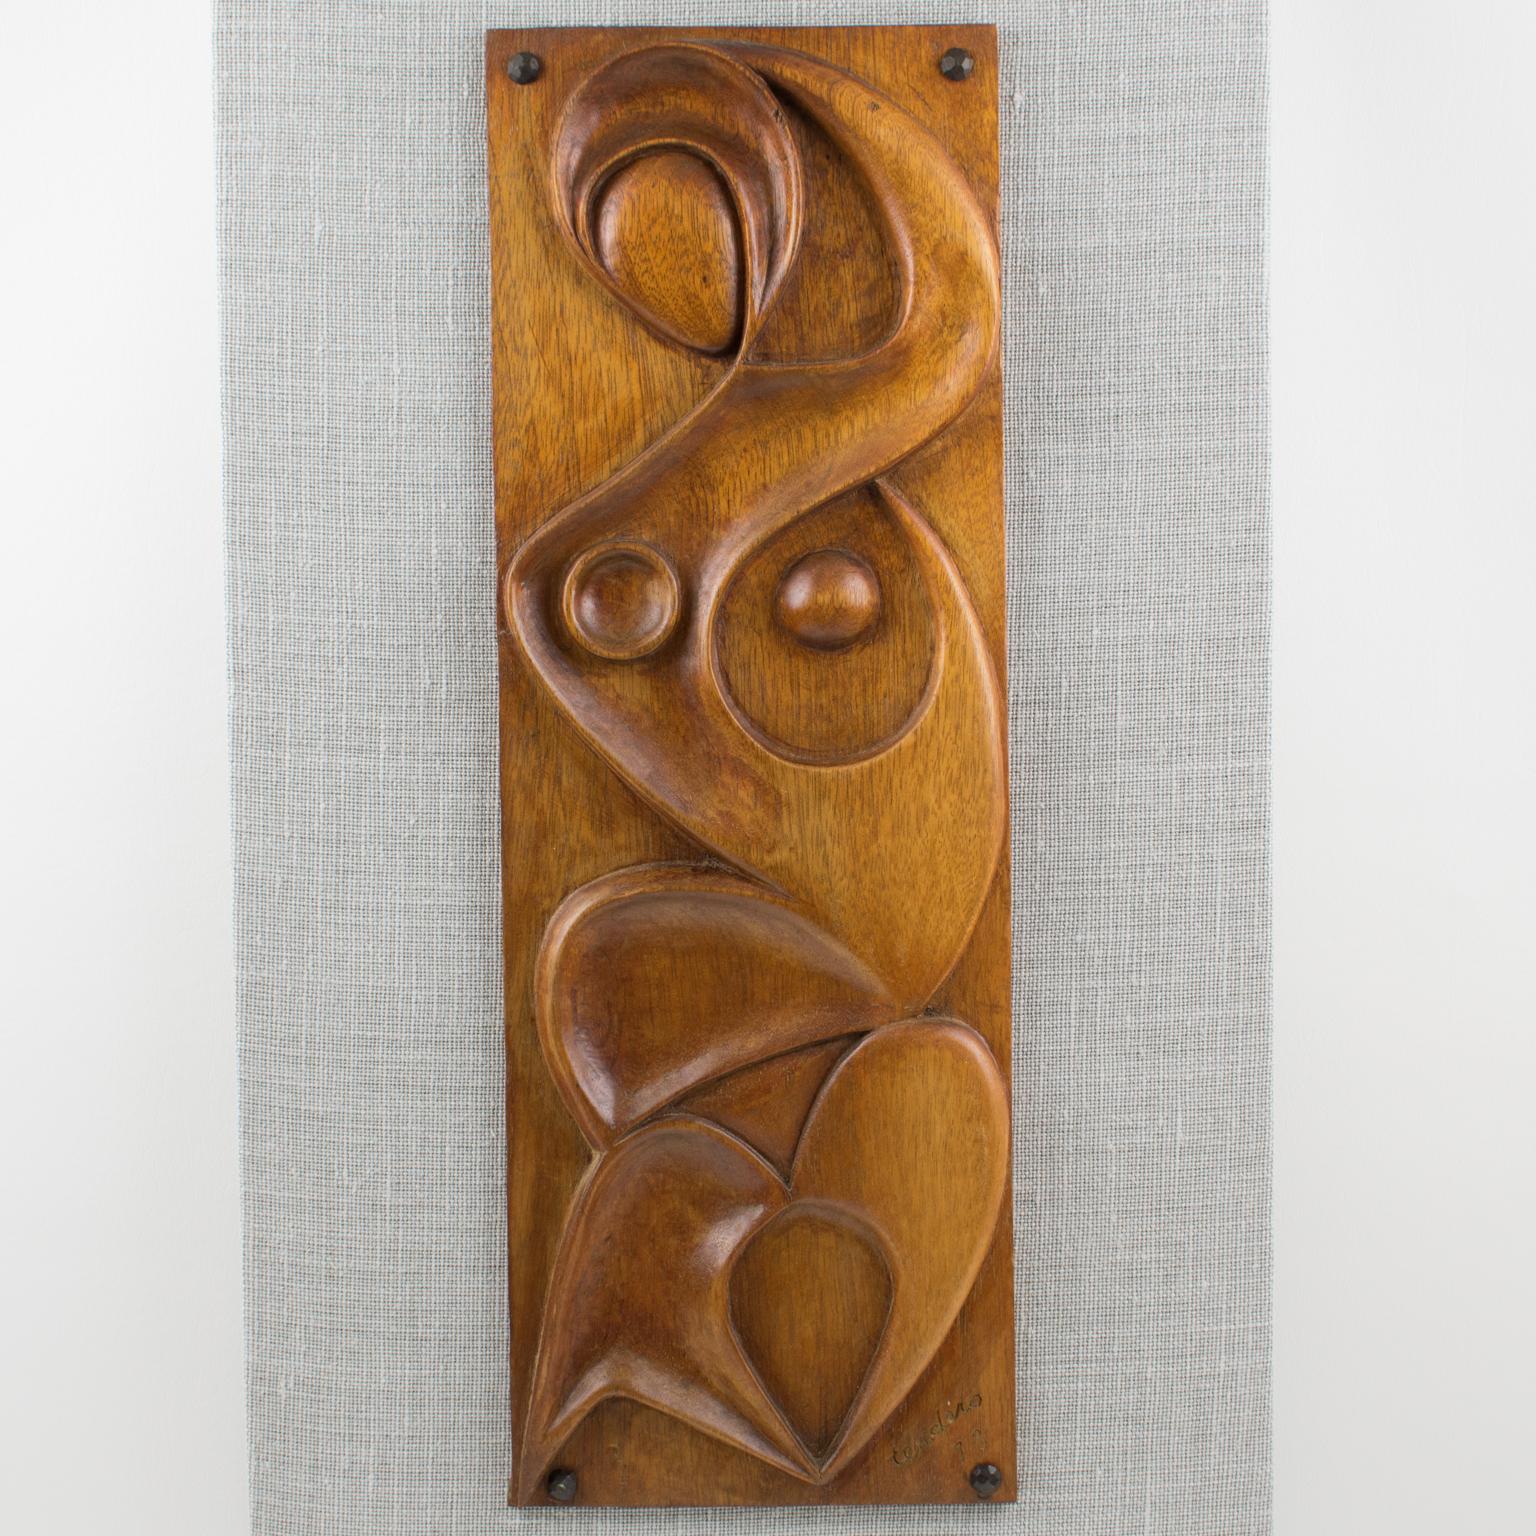 Abstract Wooden Wall-Mounted Art Sculpture Panel by Maxime Tendero For Sale 6